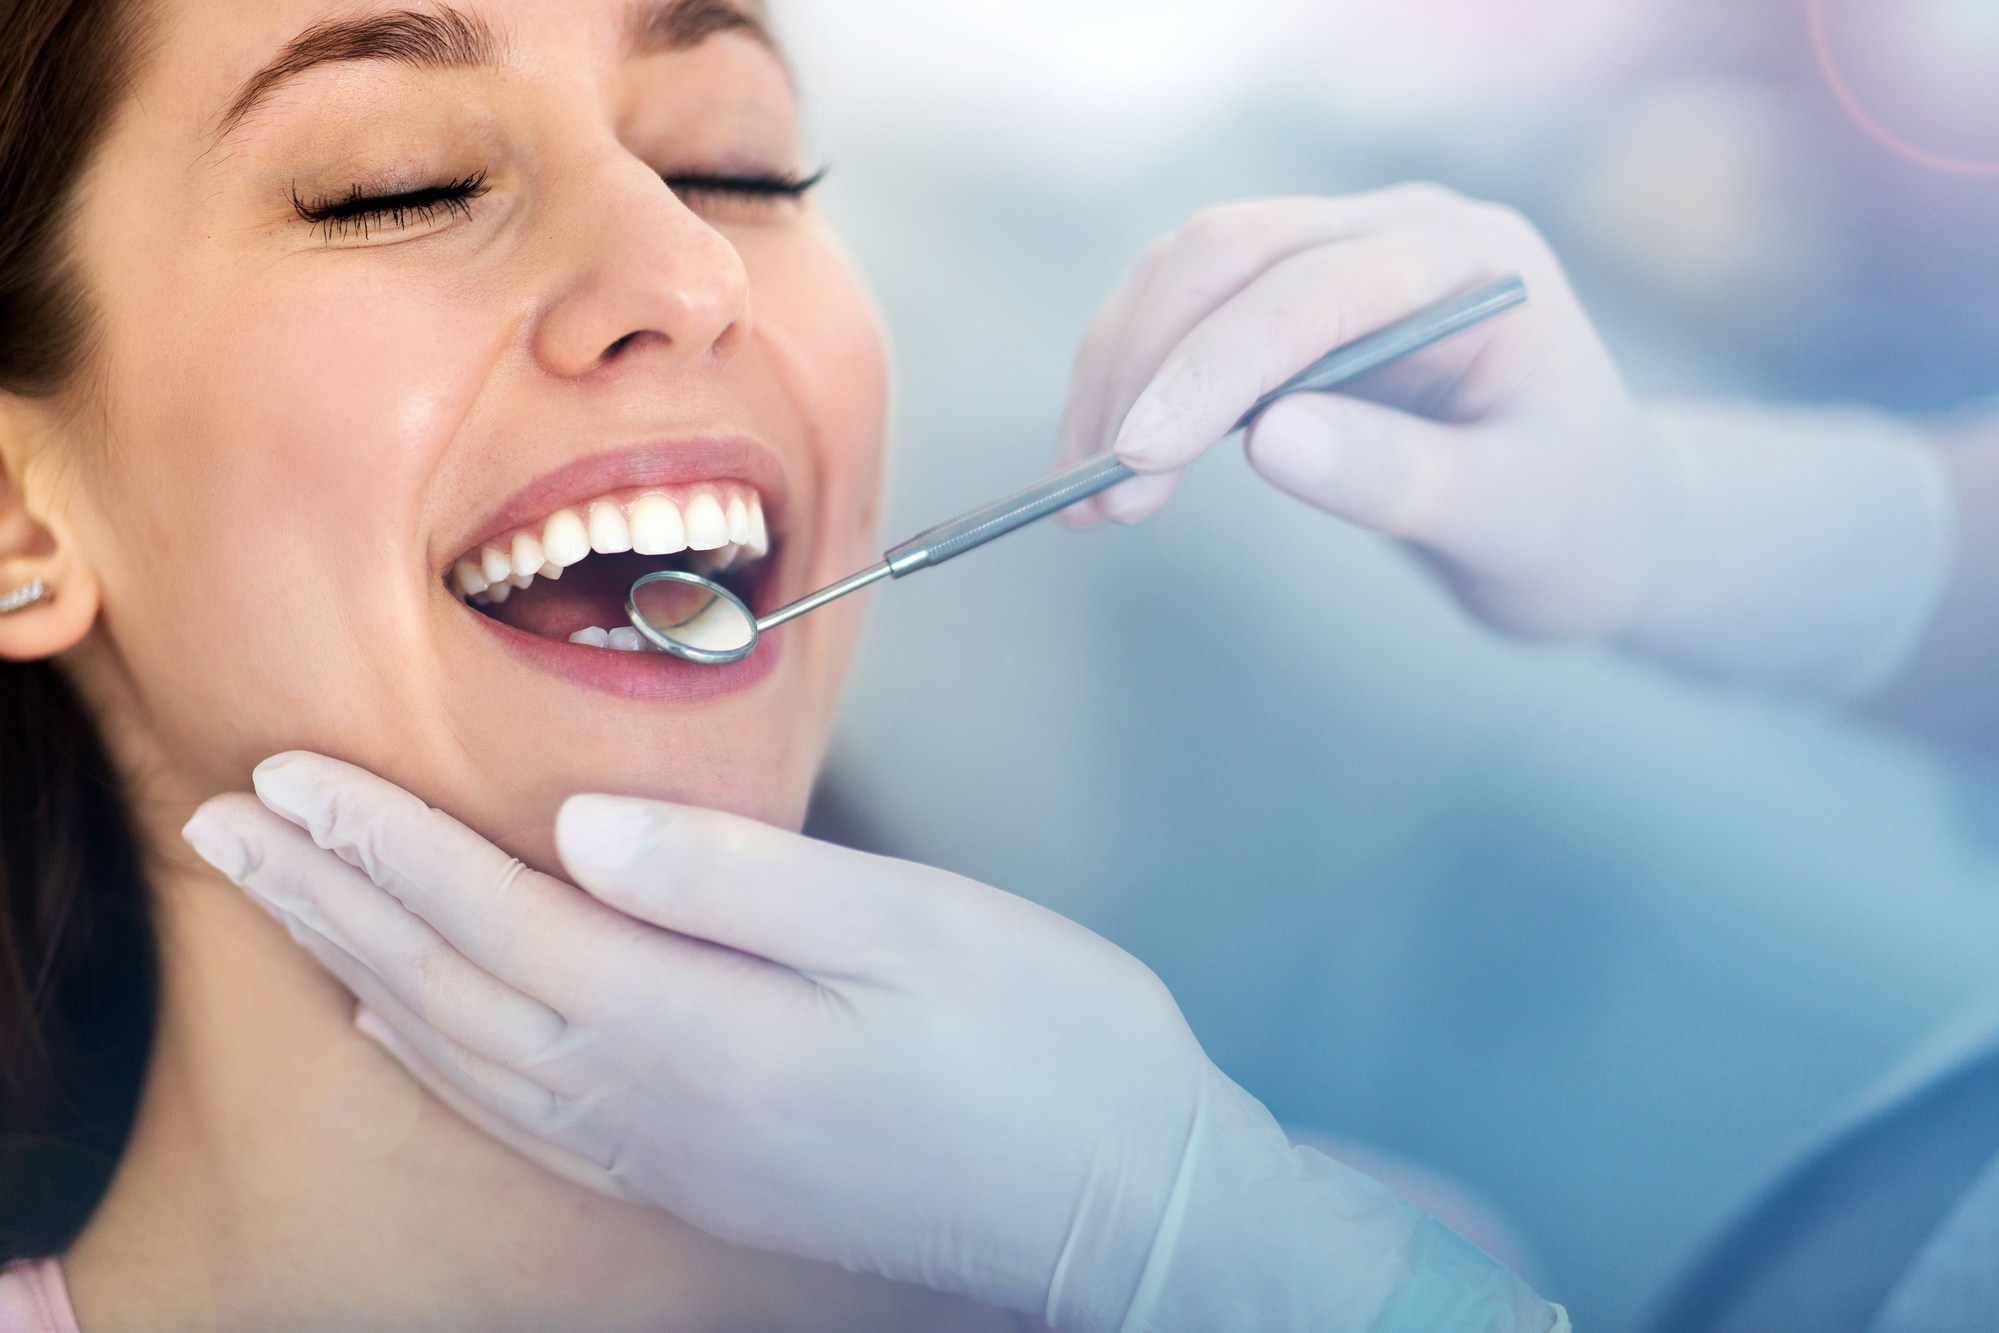 Choosing Your General Dentist: Things to Consider